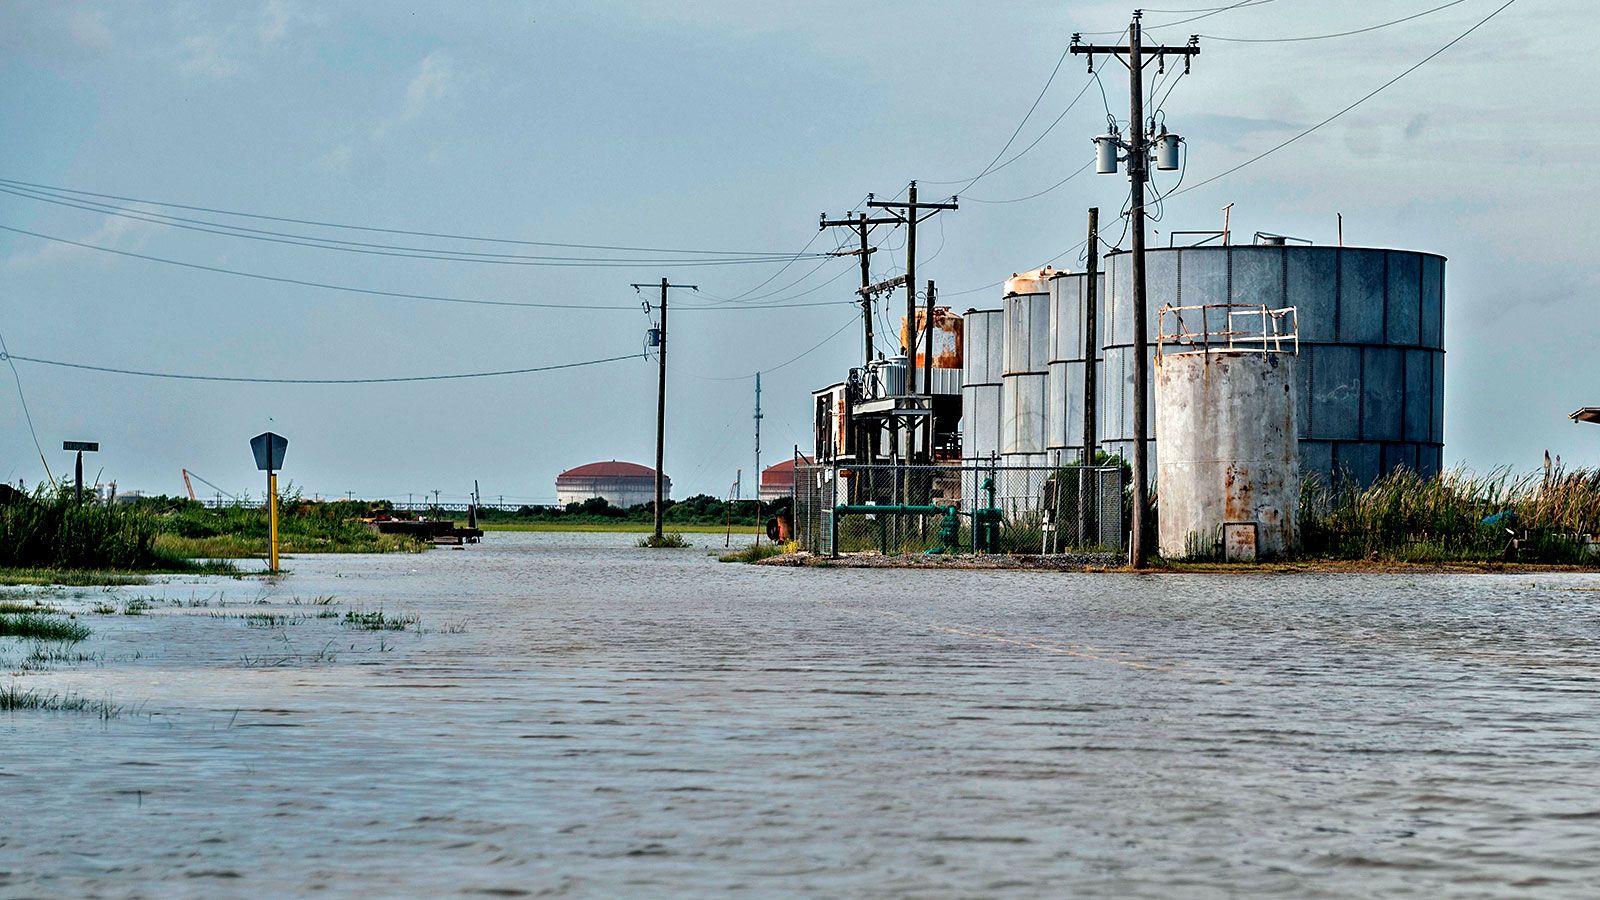 A flooded street with power lines and liquefied natural gas tanks in Cameron, Louisiana